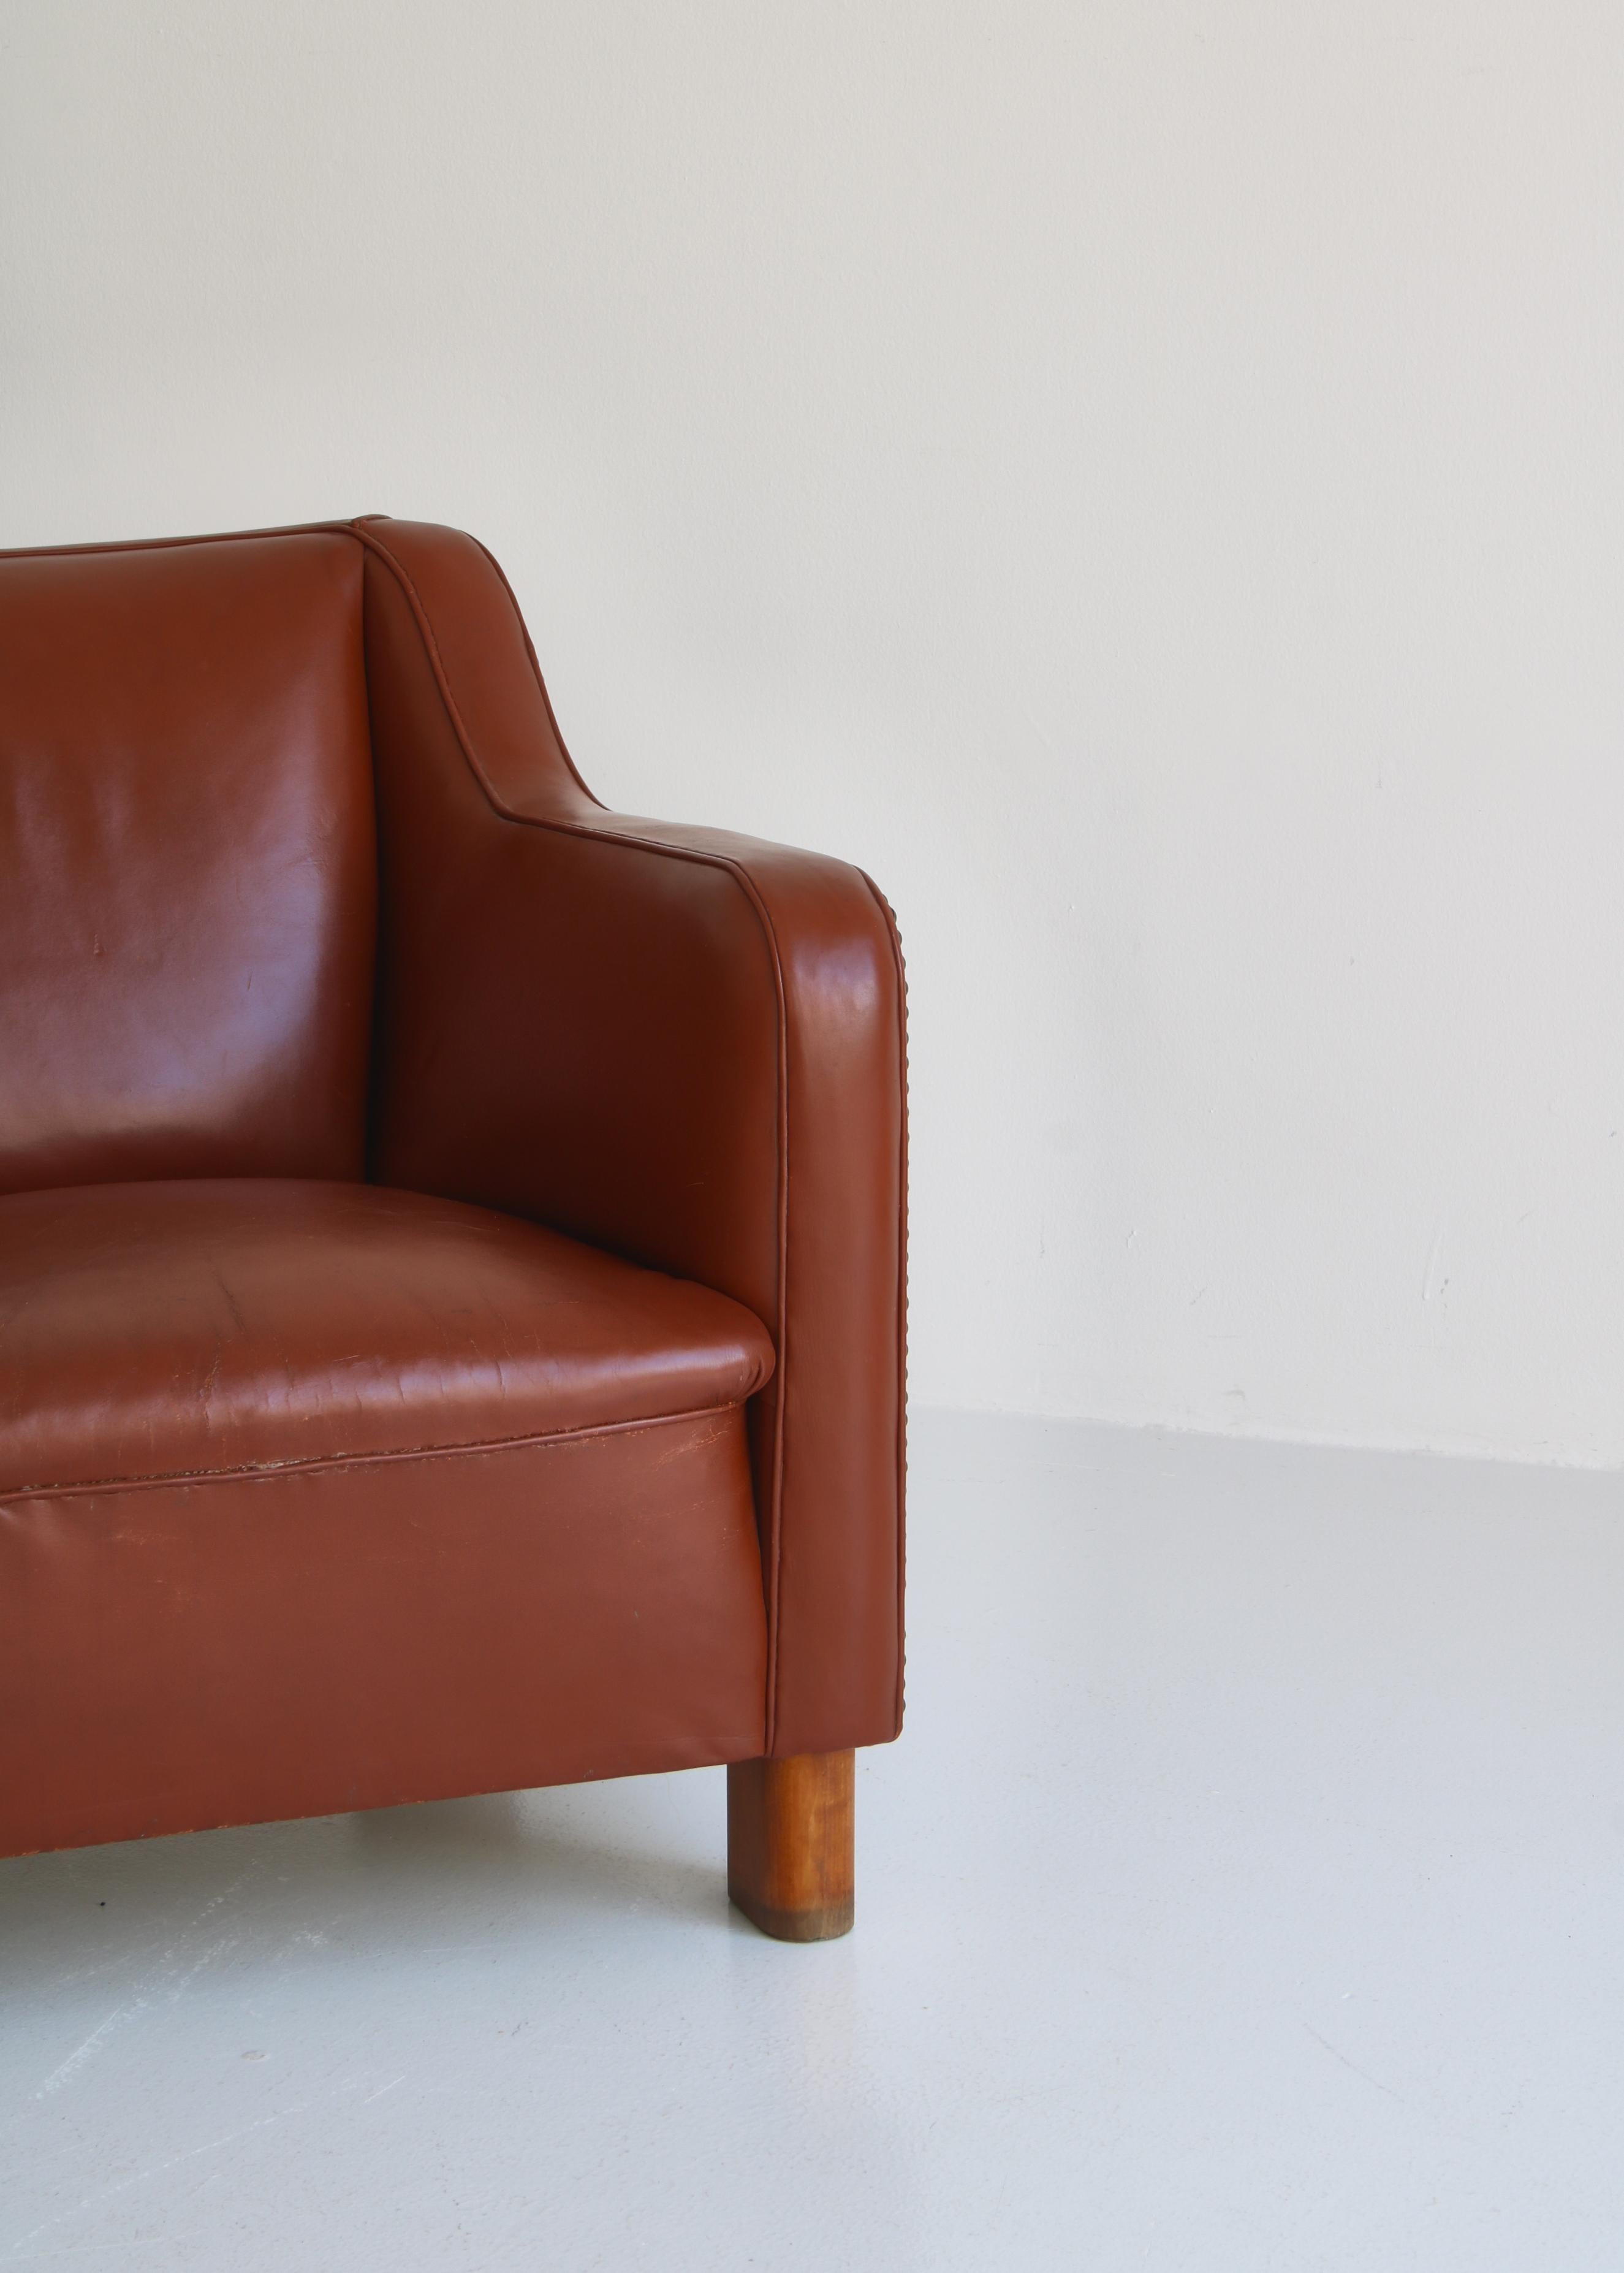 Fritz Hansen Danish Modern Easy Chair in Leather and Beech, 1940s For Sale 5